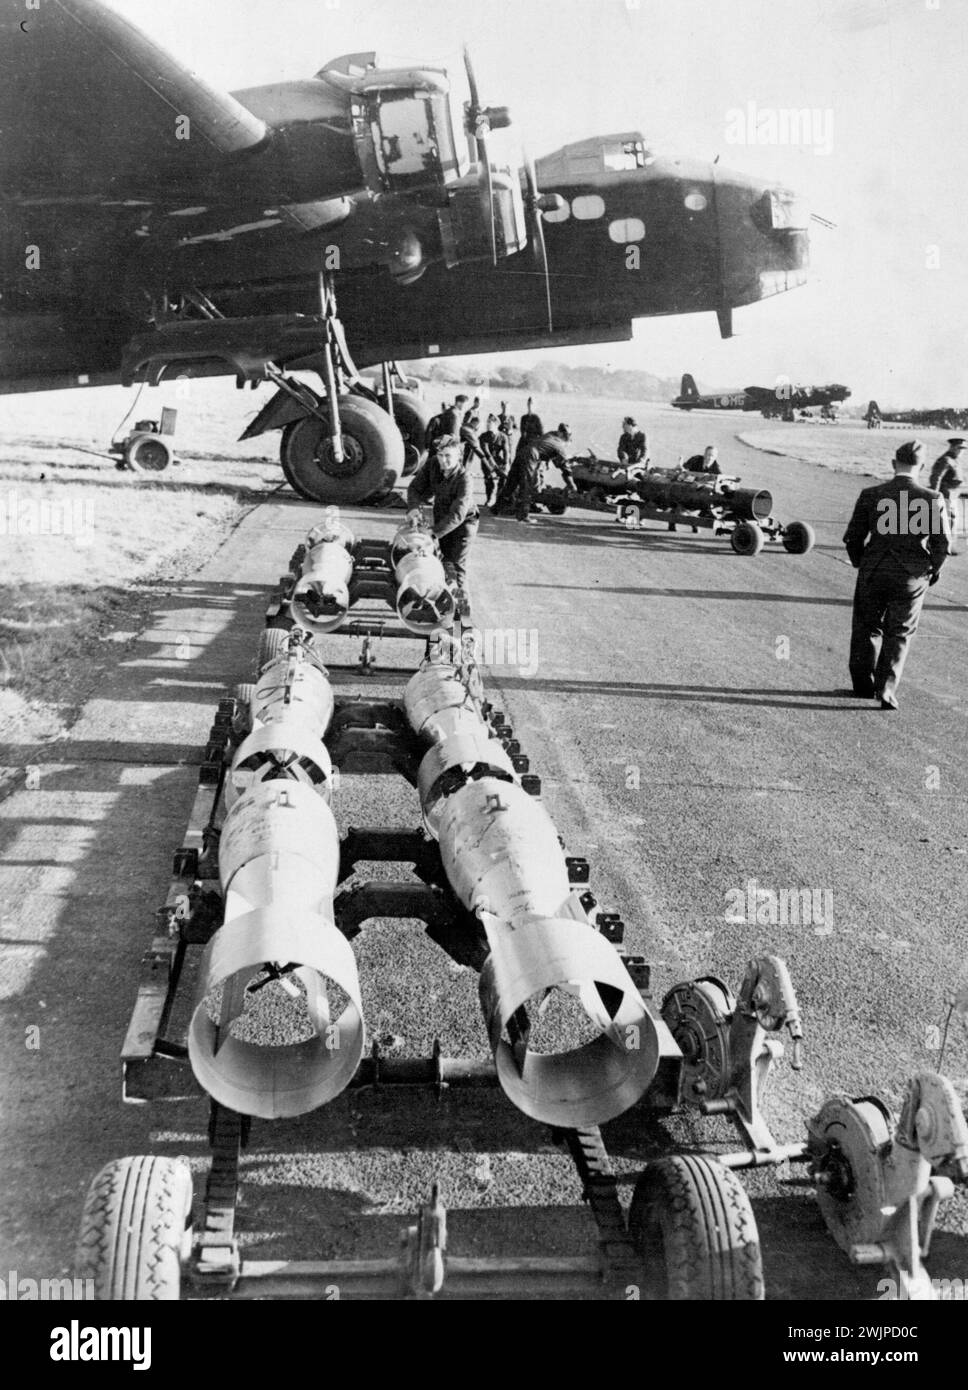 Loading A British Bomber -- A long line of bombs is snaked under the nose of a Stirling bomber in an Raf station somewhere in England. The bombs are hoisted into the racks by motor power and the plane is Credited with being Capable of carrying from three to nine times more bombs than other English bombing planes. British sources said the plane was being loaded for a raid on Germany. October 18, 1941. (Photo by Associated Press Photo). Stock Photo